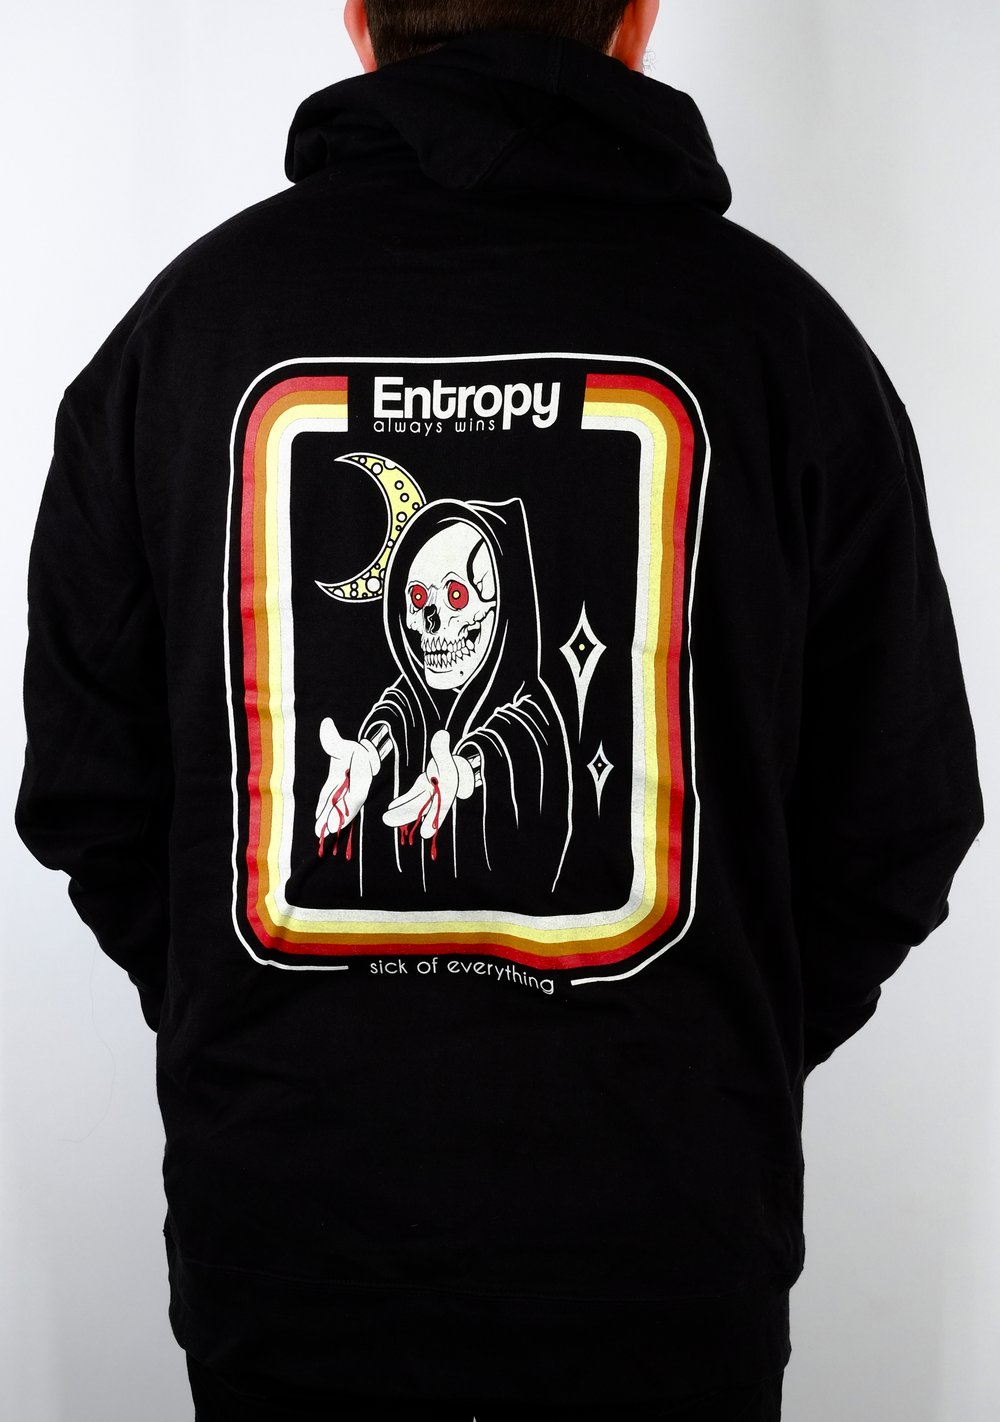 LIMITED QUANTITIES LEFT! Vintage Reaper Pullover Hoodie